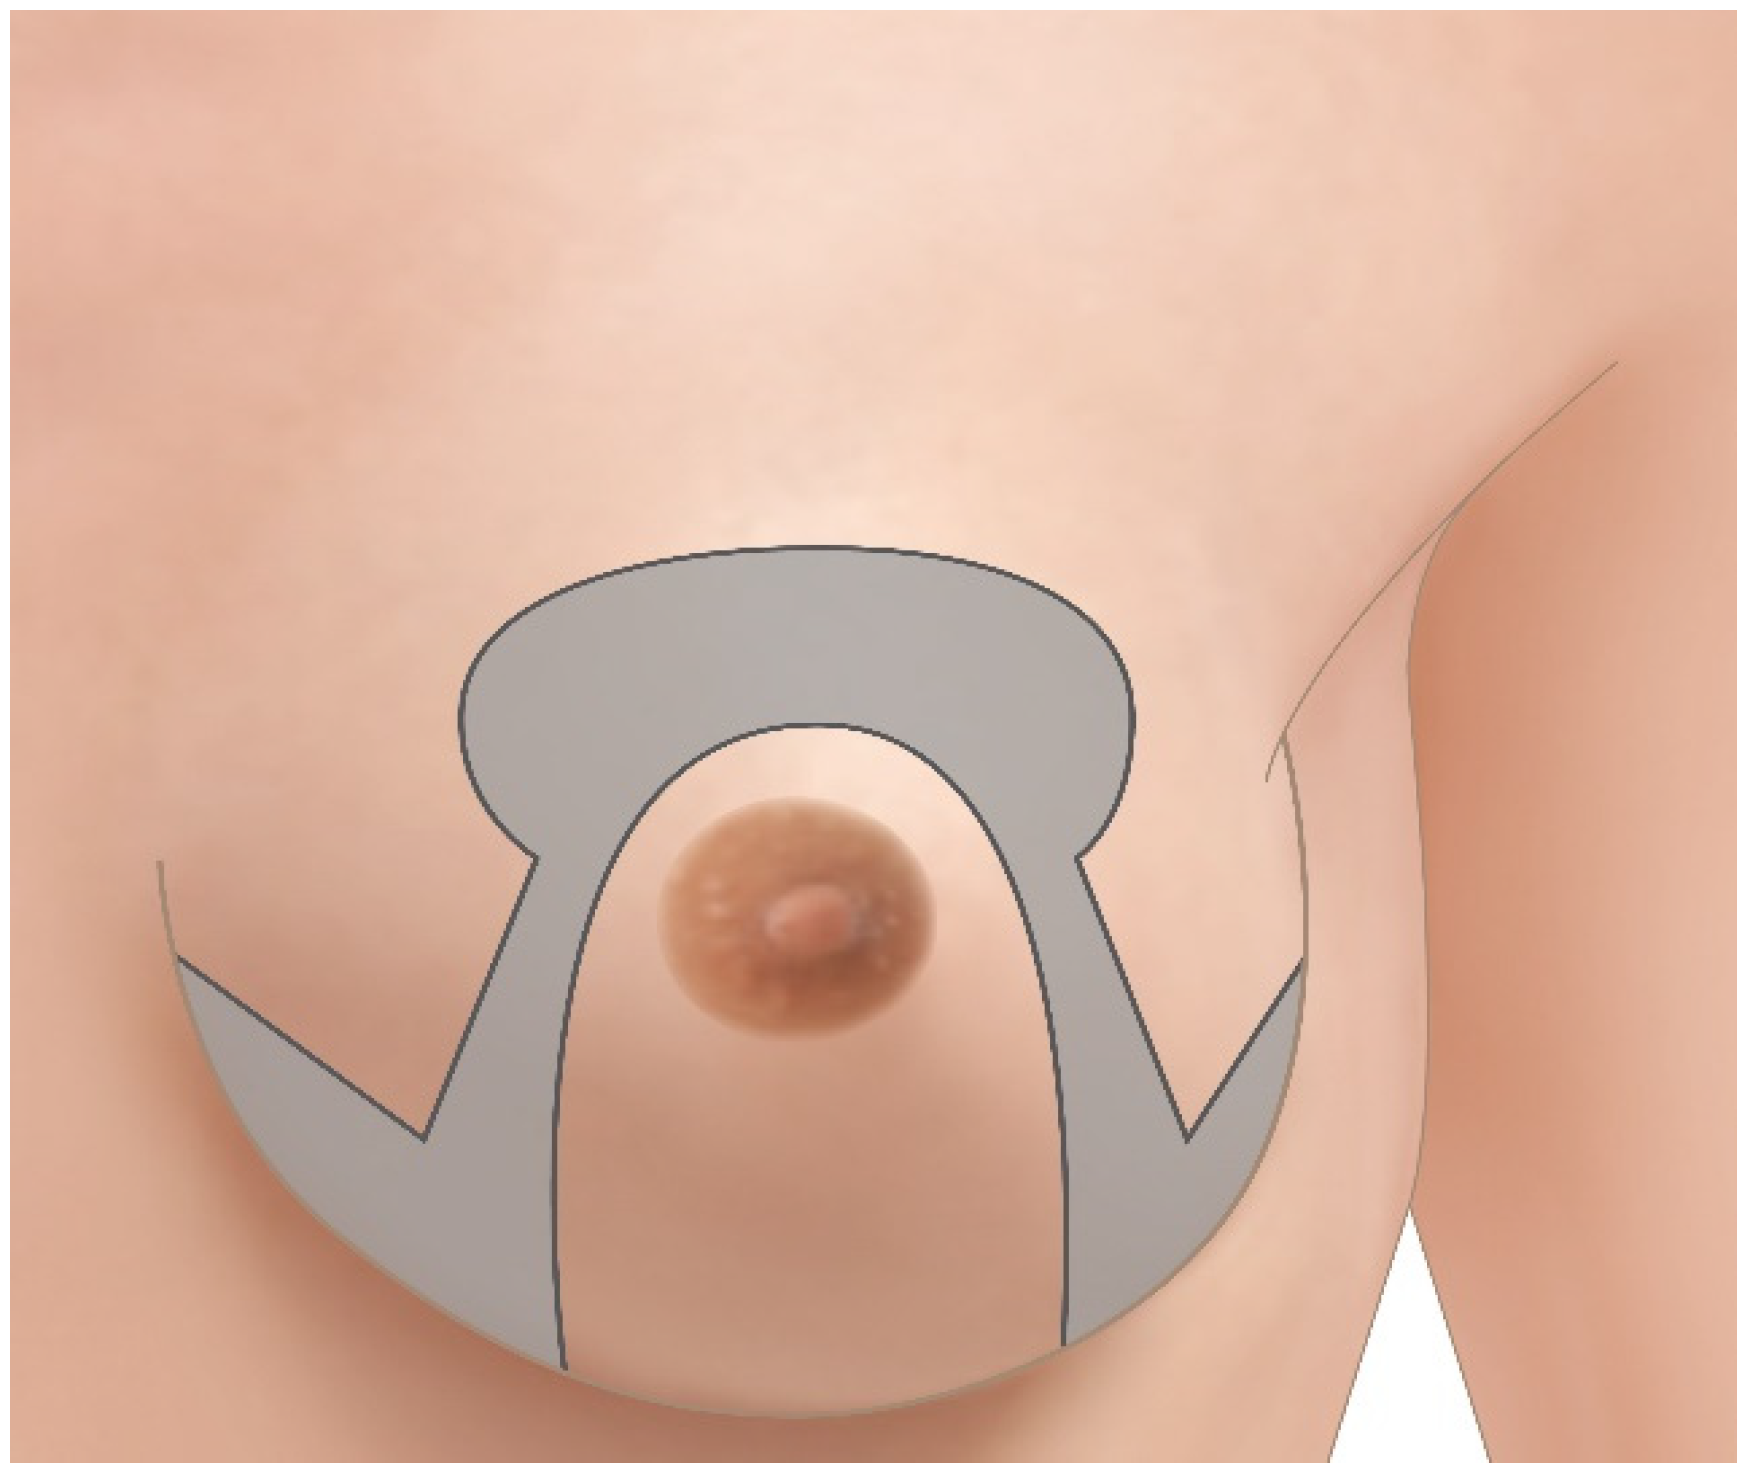 Aesthetic and predictable correction of the inverted nipple